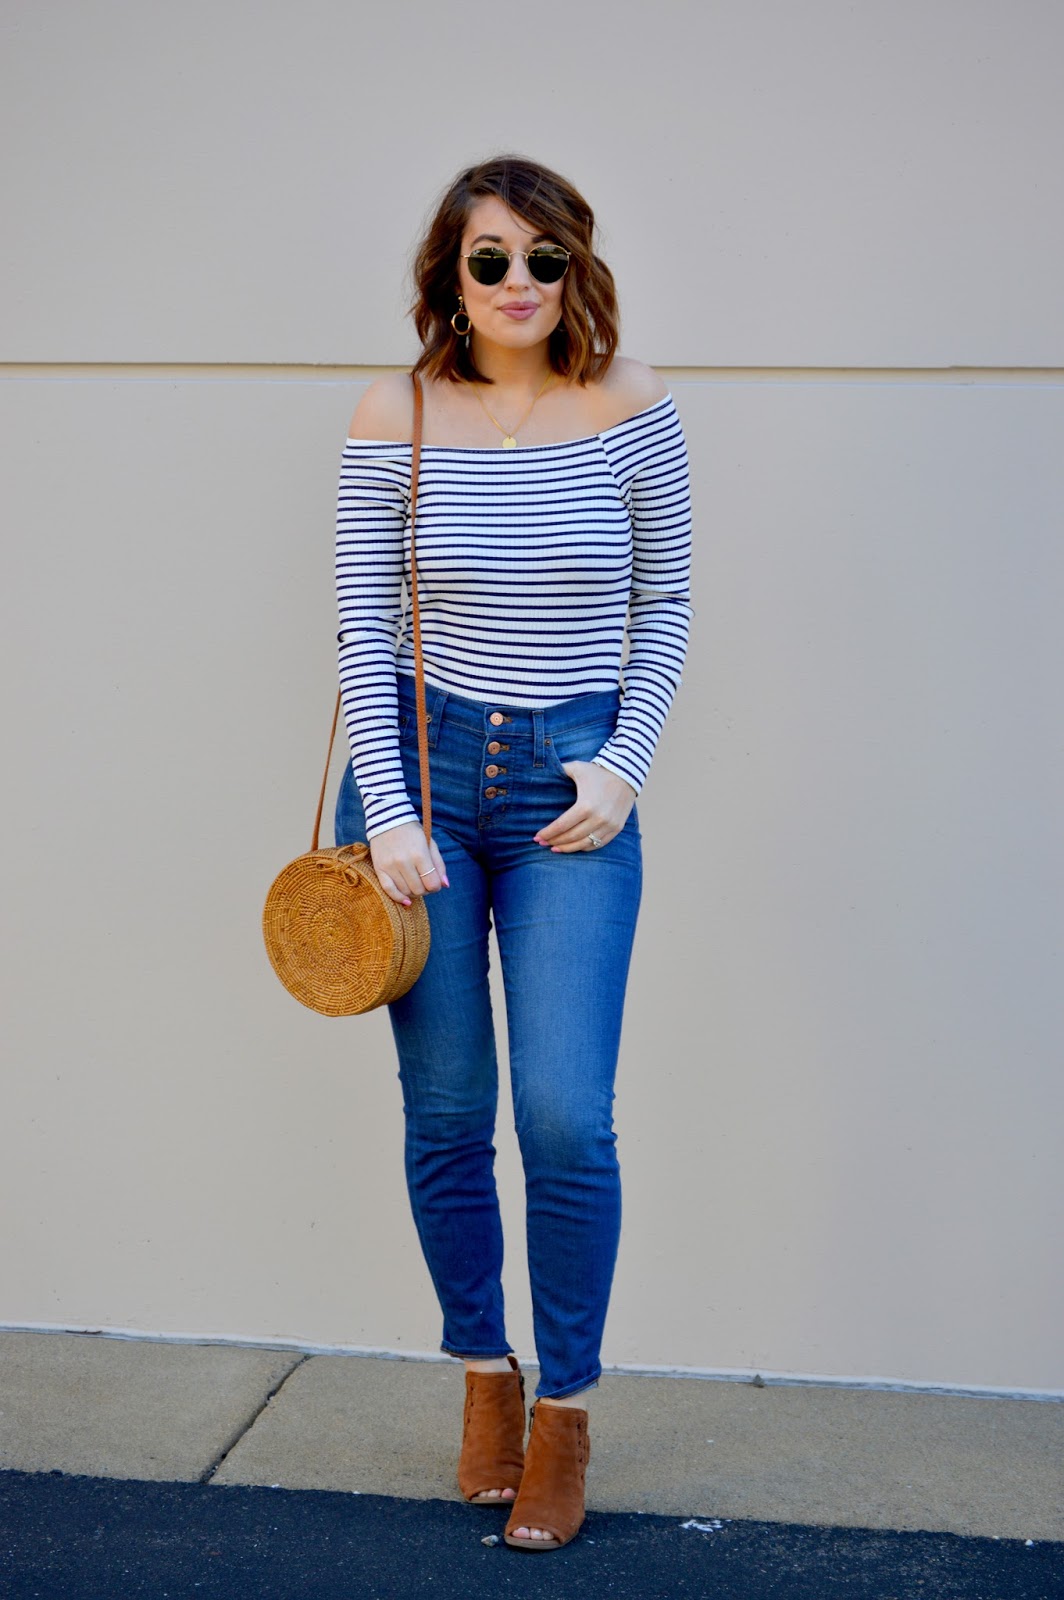 Rosy Outlook: The Cutest Striped Bodysuit + FF Link-Up!